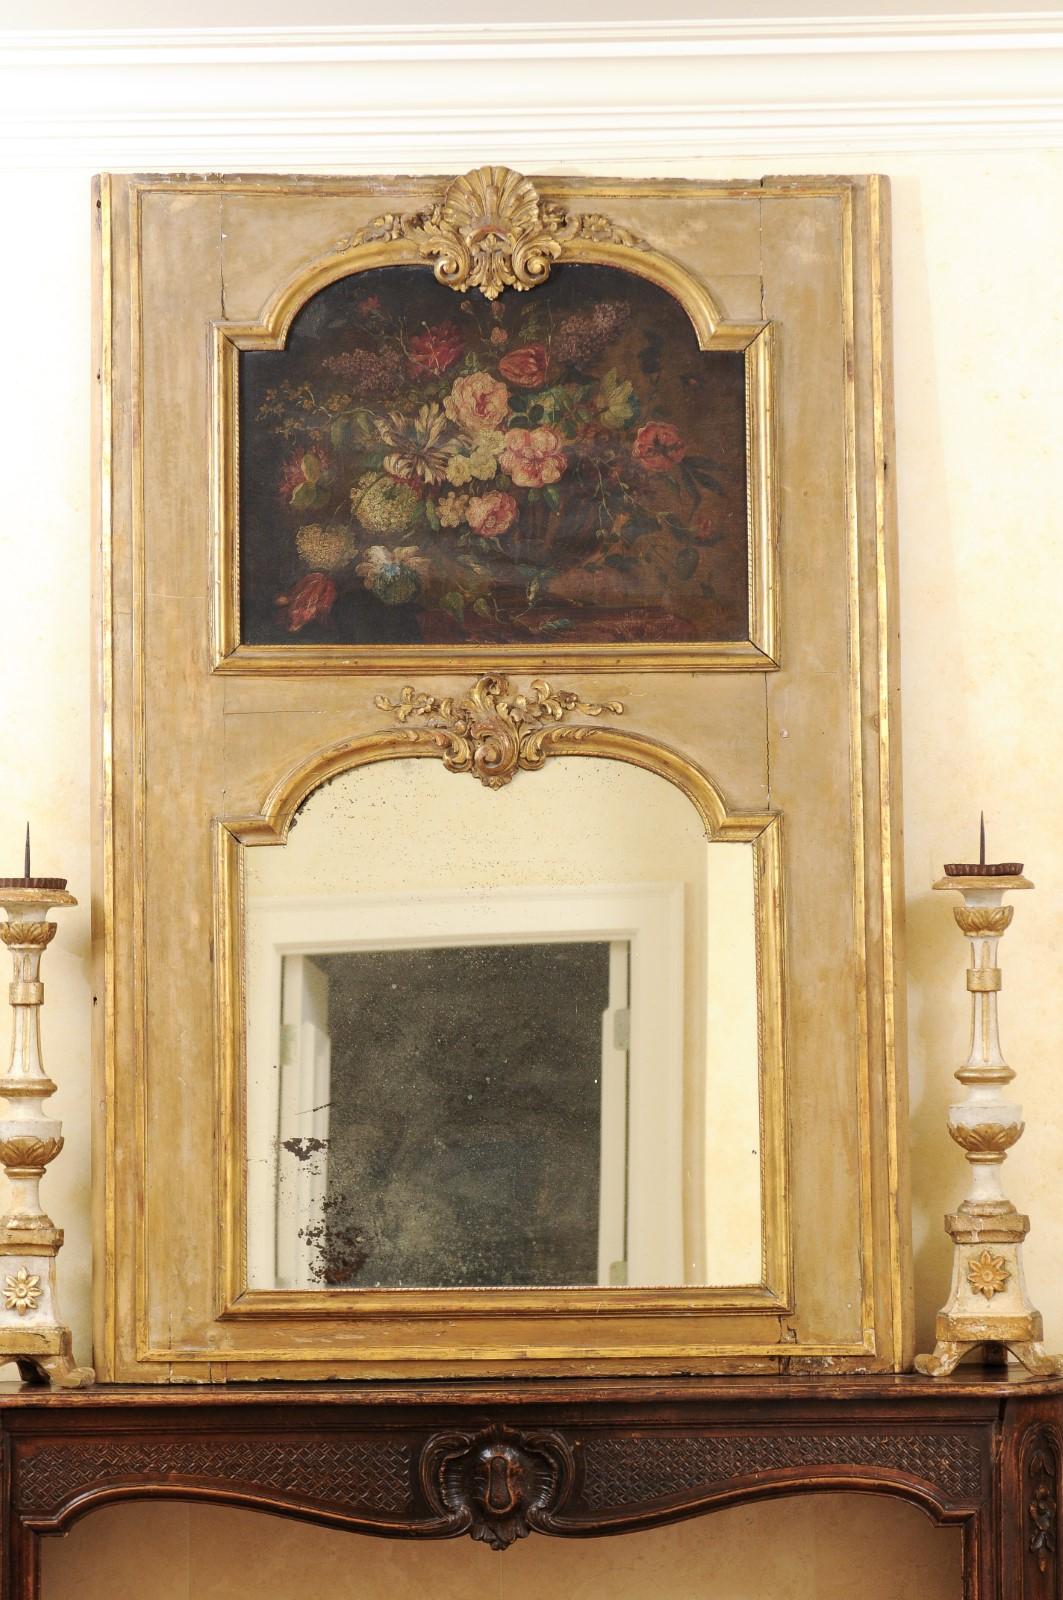 A French painted trumeau mirror from the late 18th century, with original oil on canvas floral painting. Created in France during the last decade of the 18th century, this trumeau mirror features an all original painted frame with gilded accents,